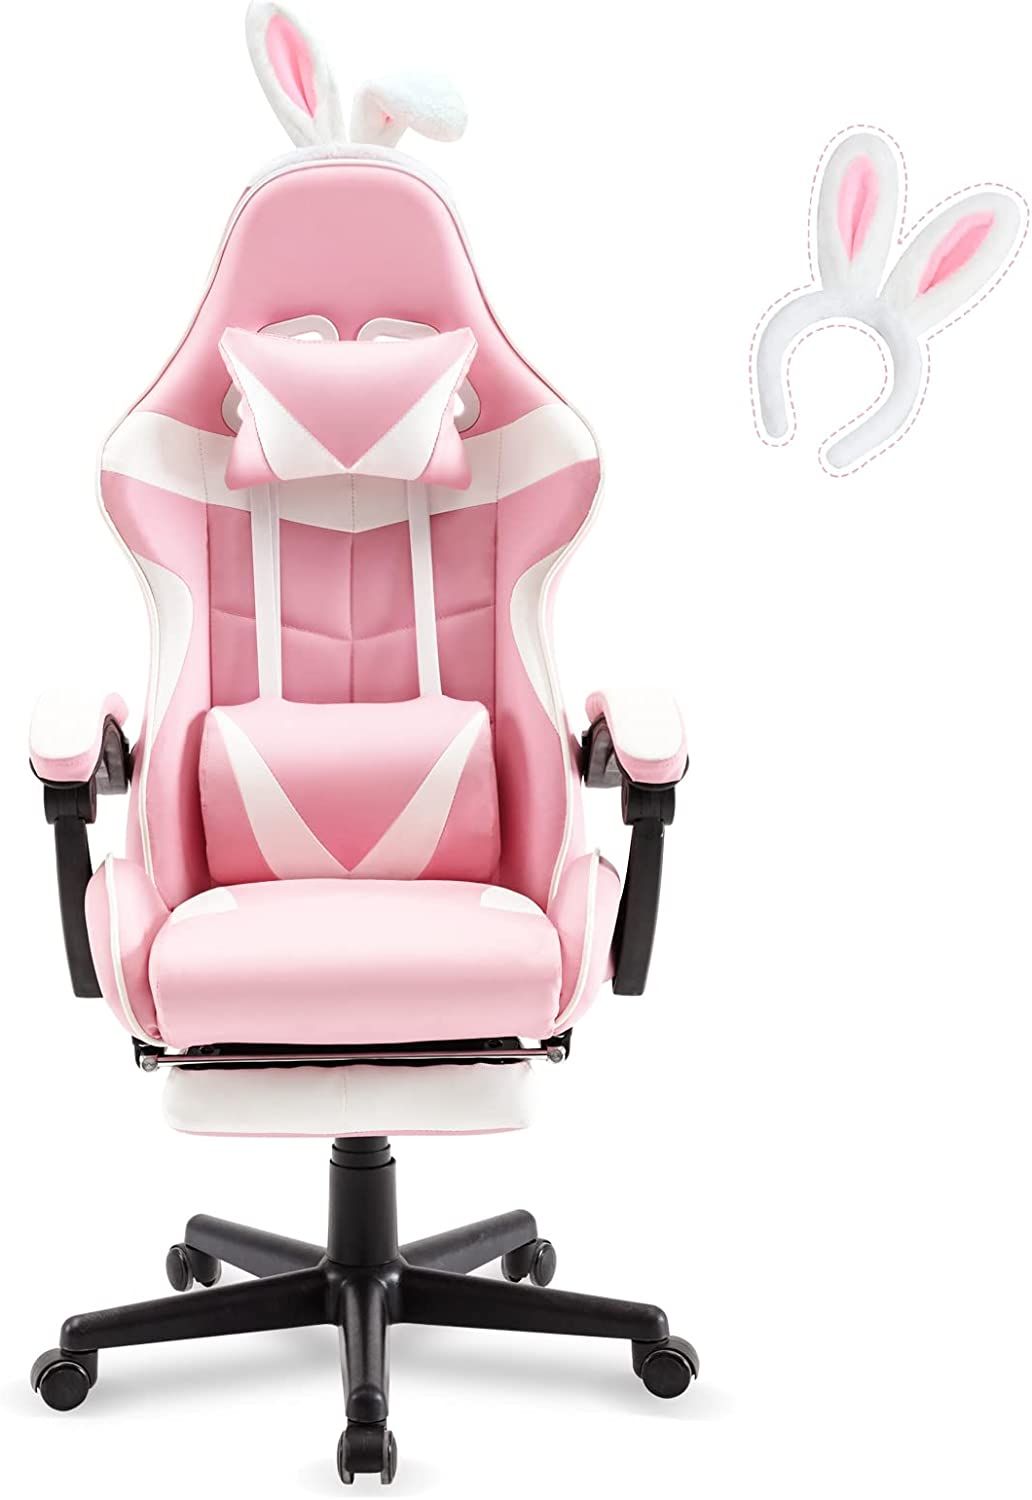 Soontrans pink gaming chair with footrest